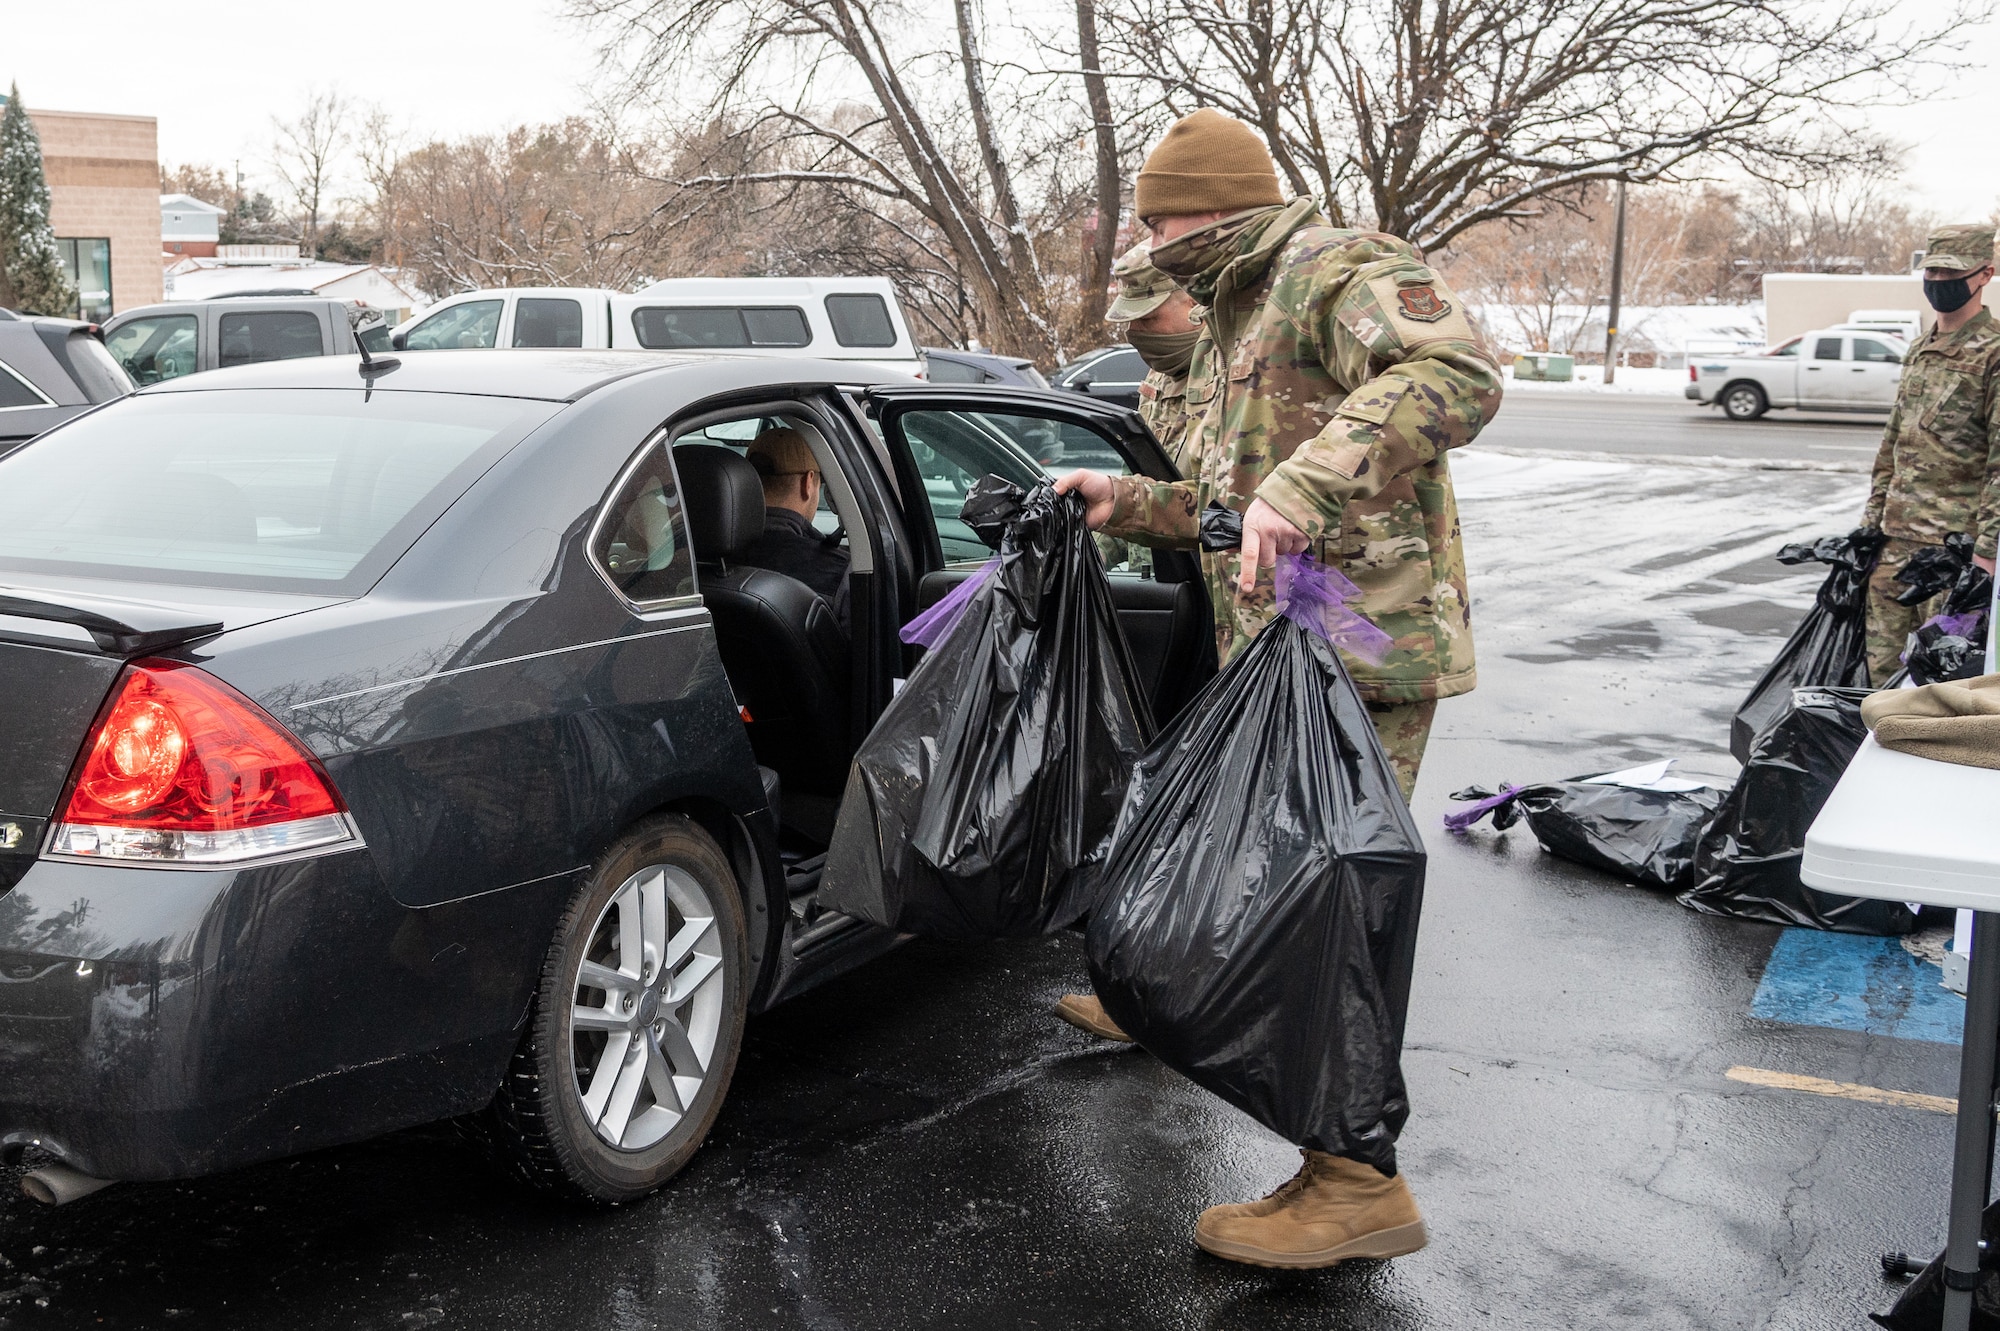 Senior Airman Ben Little, 419th Fighter Wing, loads bags of wrapped gifts into a volunteer's car at Utah Foster Care Foundation in Ogden, Utah, Dec. 17, 2020, as part of a volunteer effort called Santa Brigade